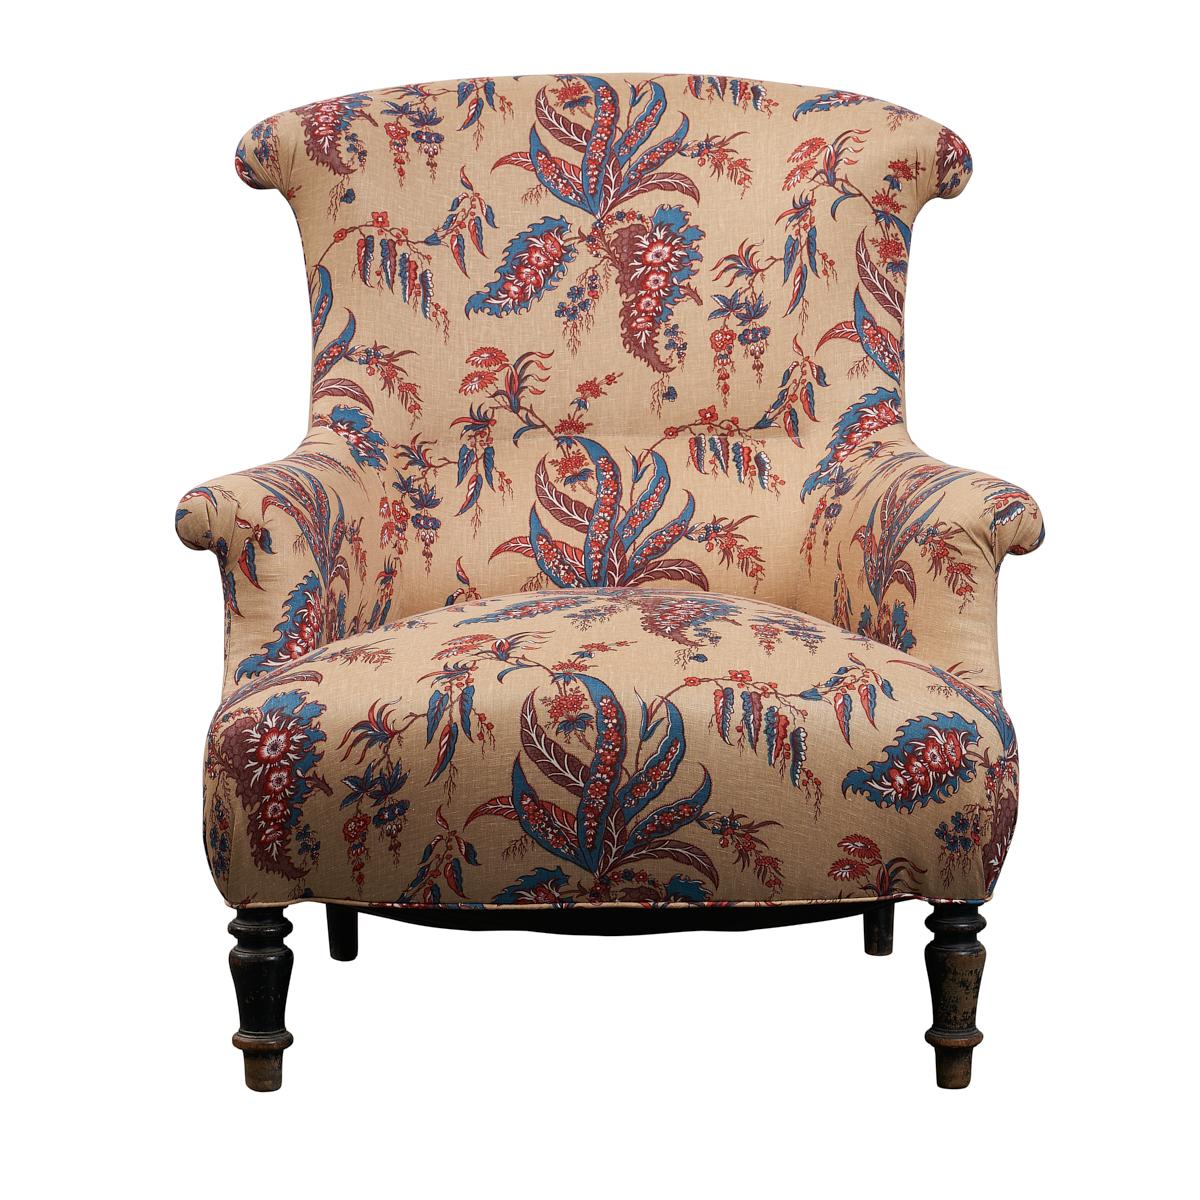 We love the elegant silhouette of this pair of late 19th-century chairs, discovered in the South of France and newly upholstered in Schumacher's Apolline Botanical fabric. With high curved backs that are perfectly pitched and scrolled arms, these